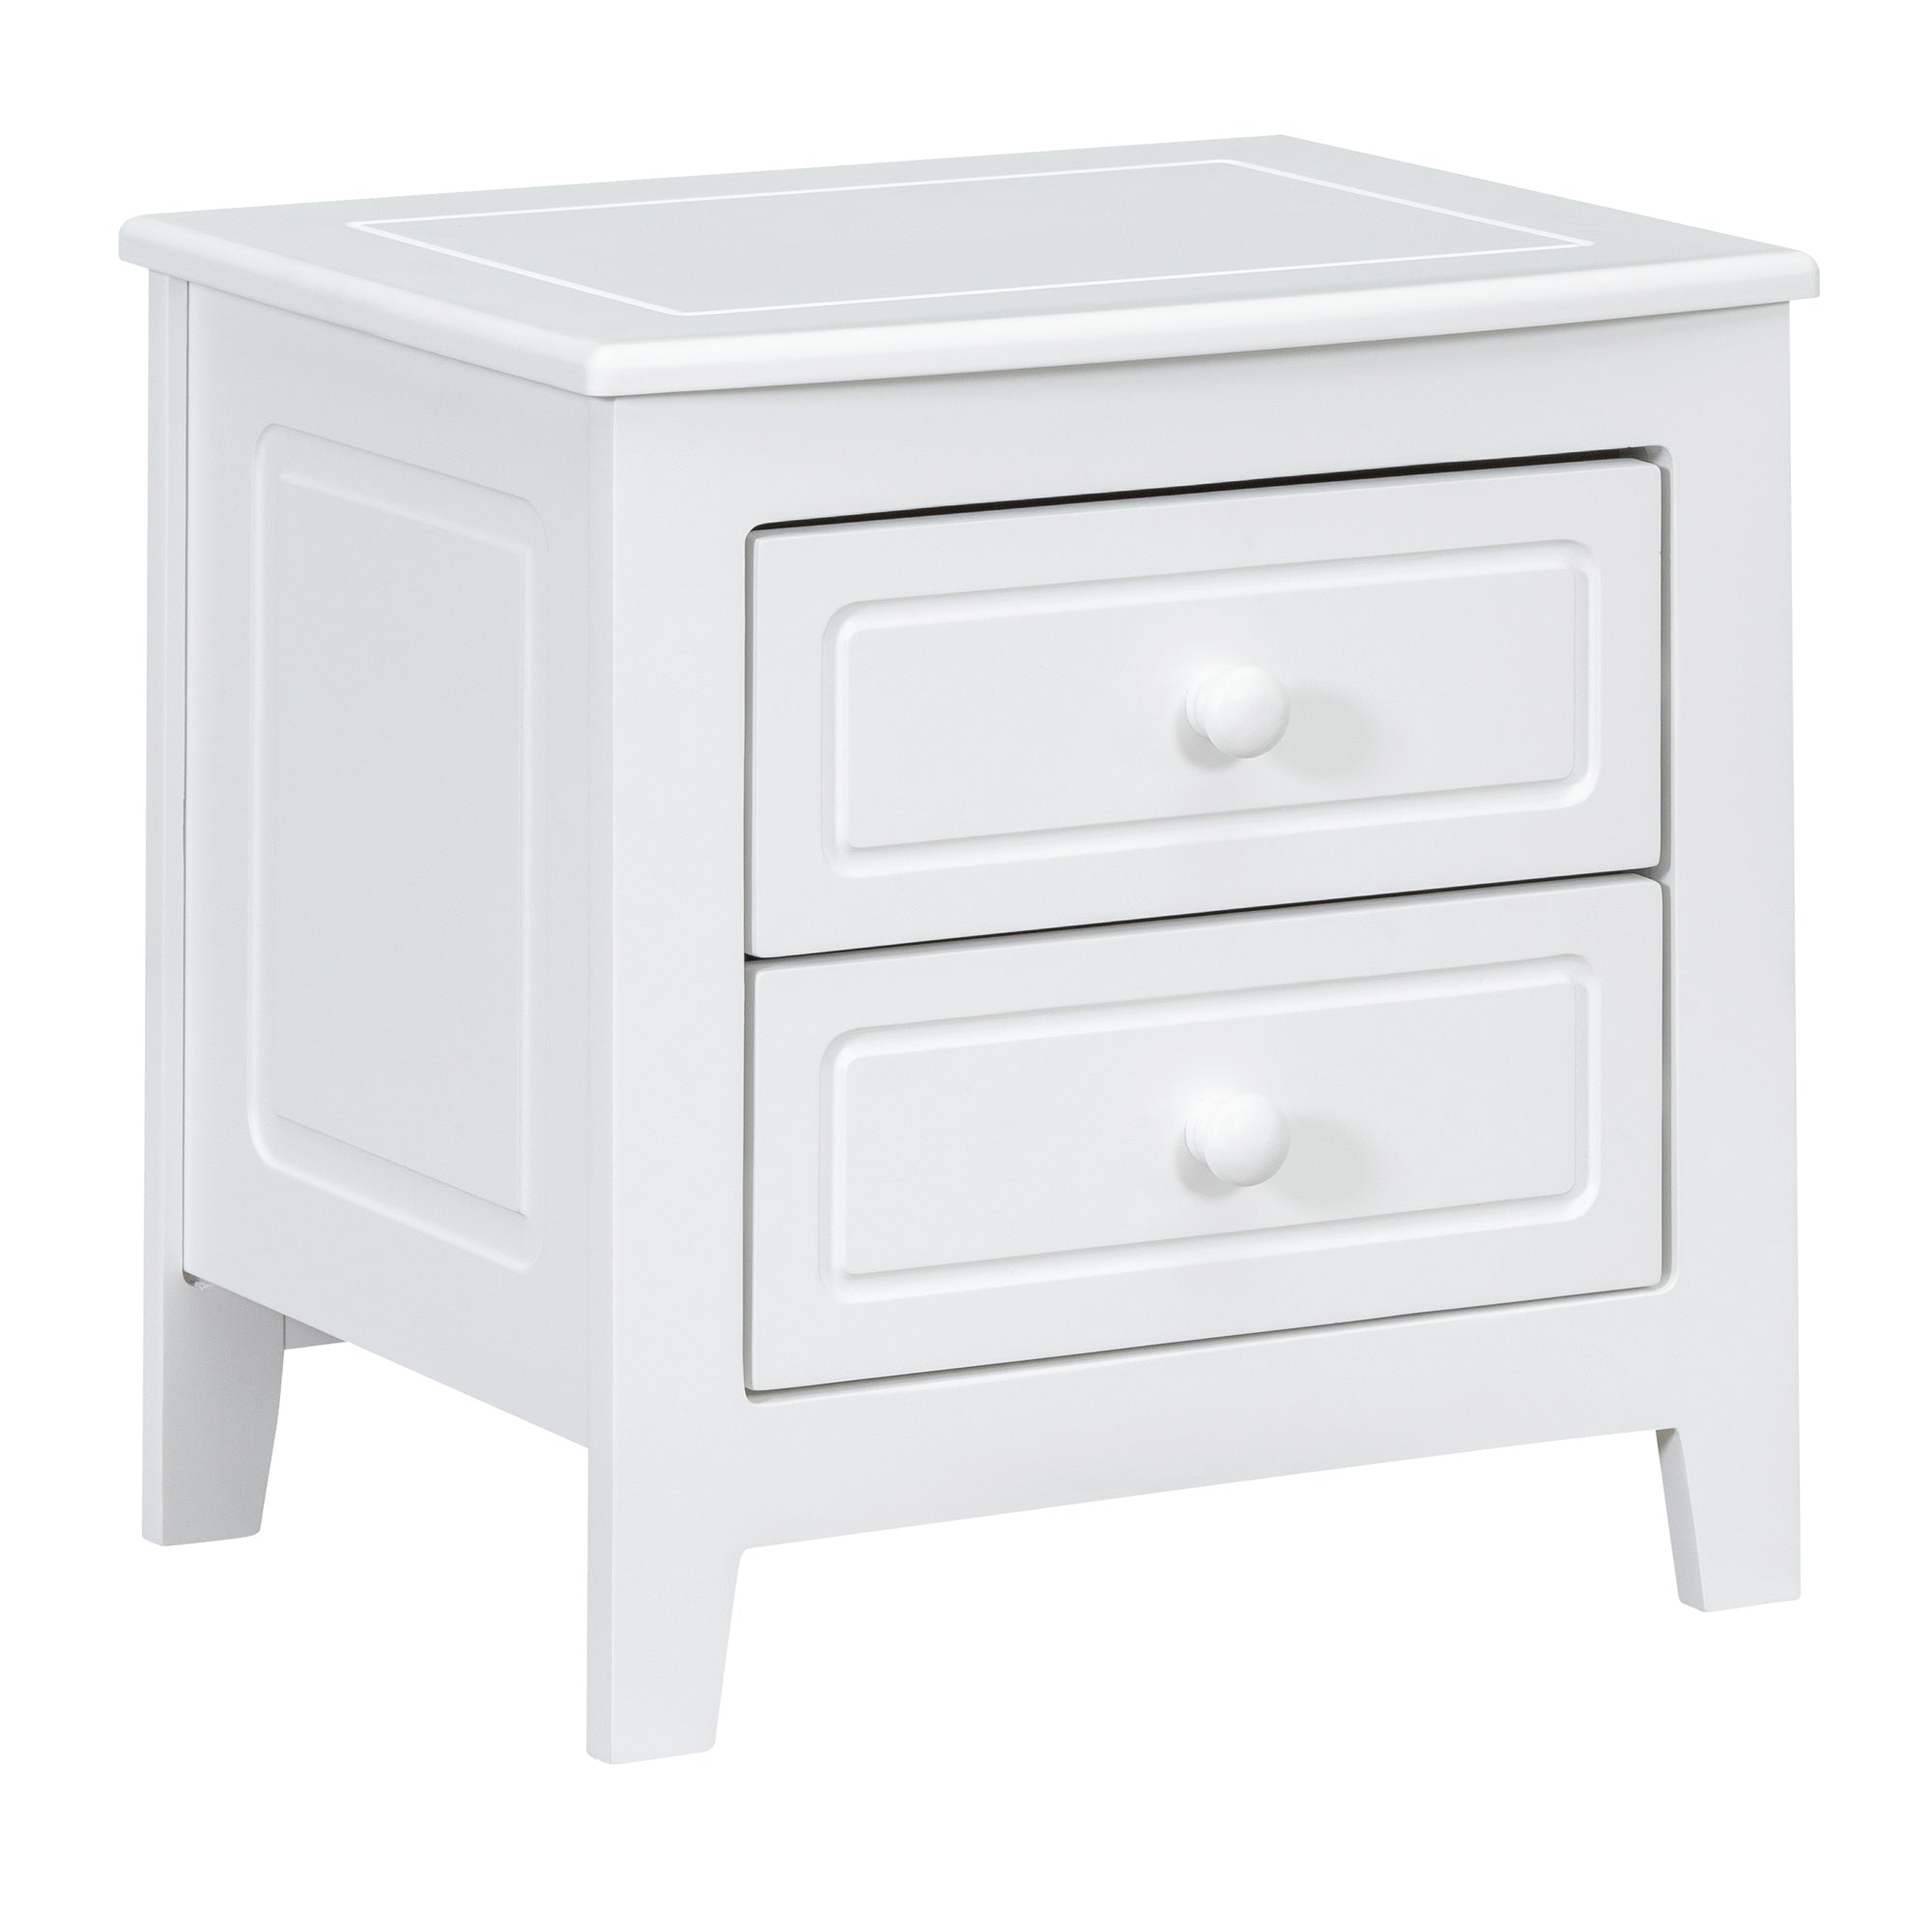 Mid Century Retro Bedside Table with Classic Design 2-Drawer Nightstand - White